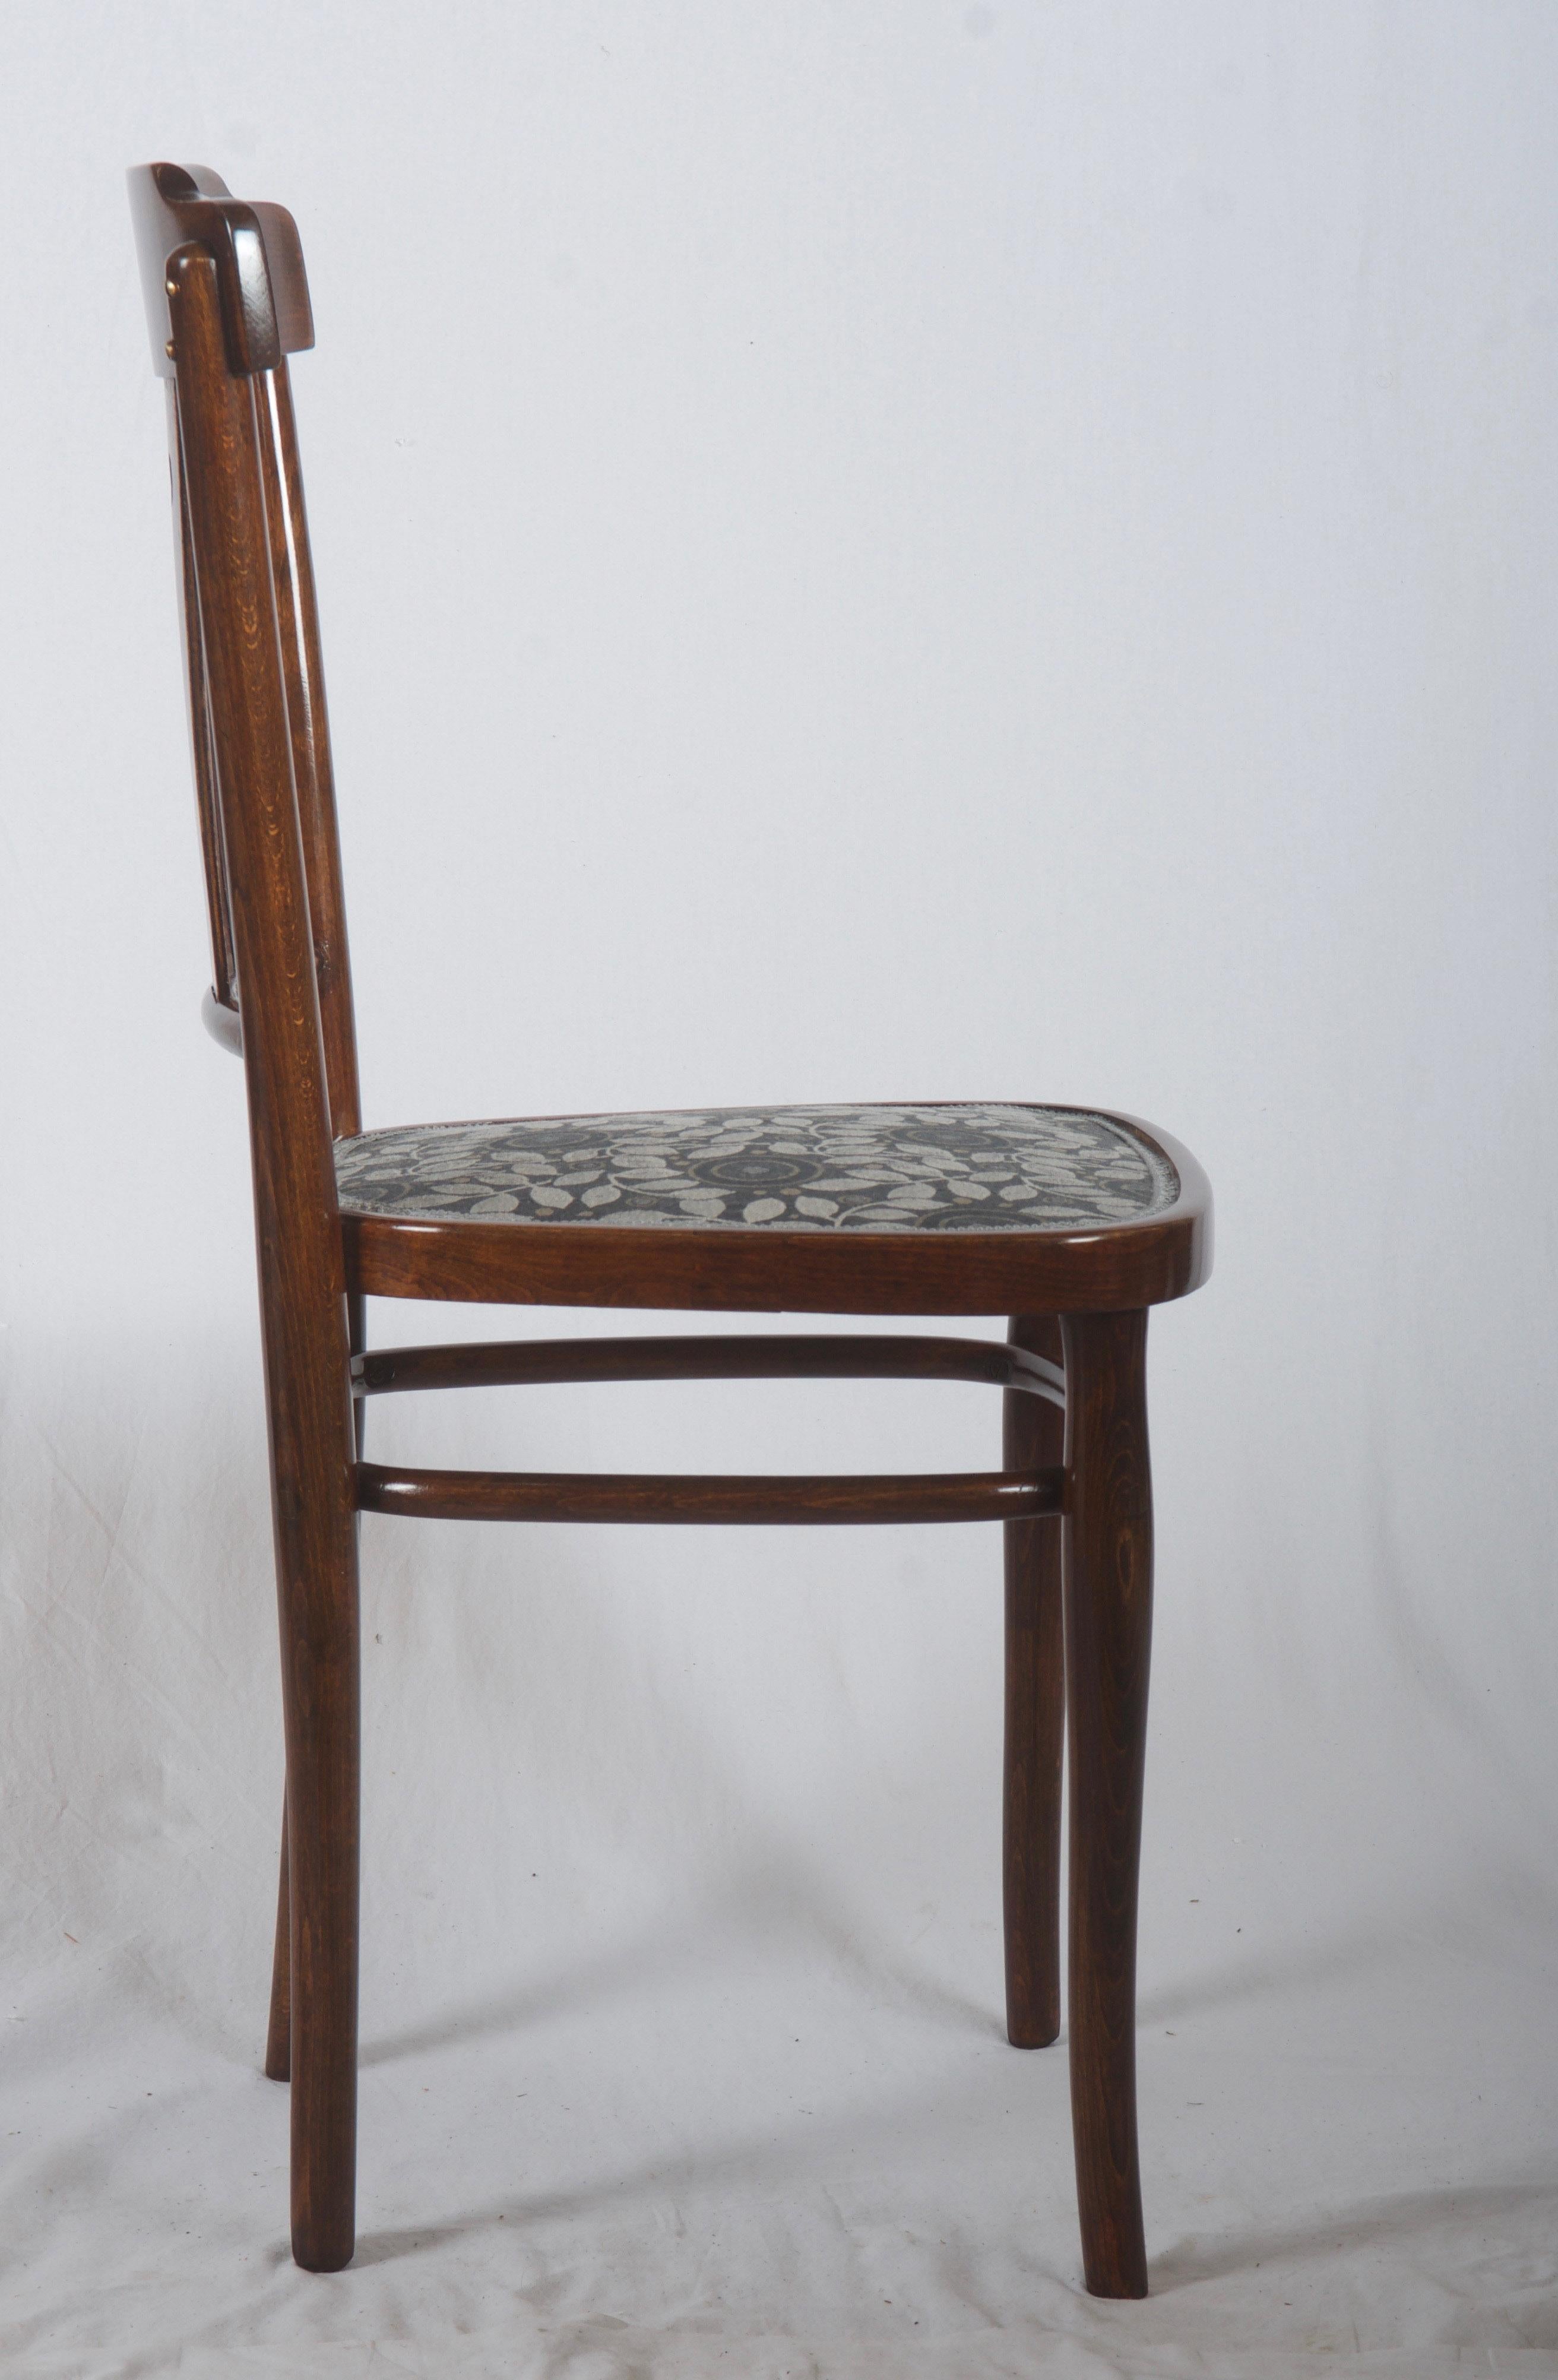 Beech bentwood walnut stained with upholstered seat (fabric designed by Josef Hoffmann), made in Austria in the 1900s.
Four pieces available. Only one restored now, delivery time for the rest about 10-14 days.